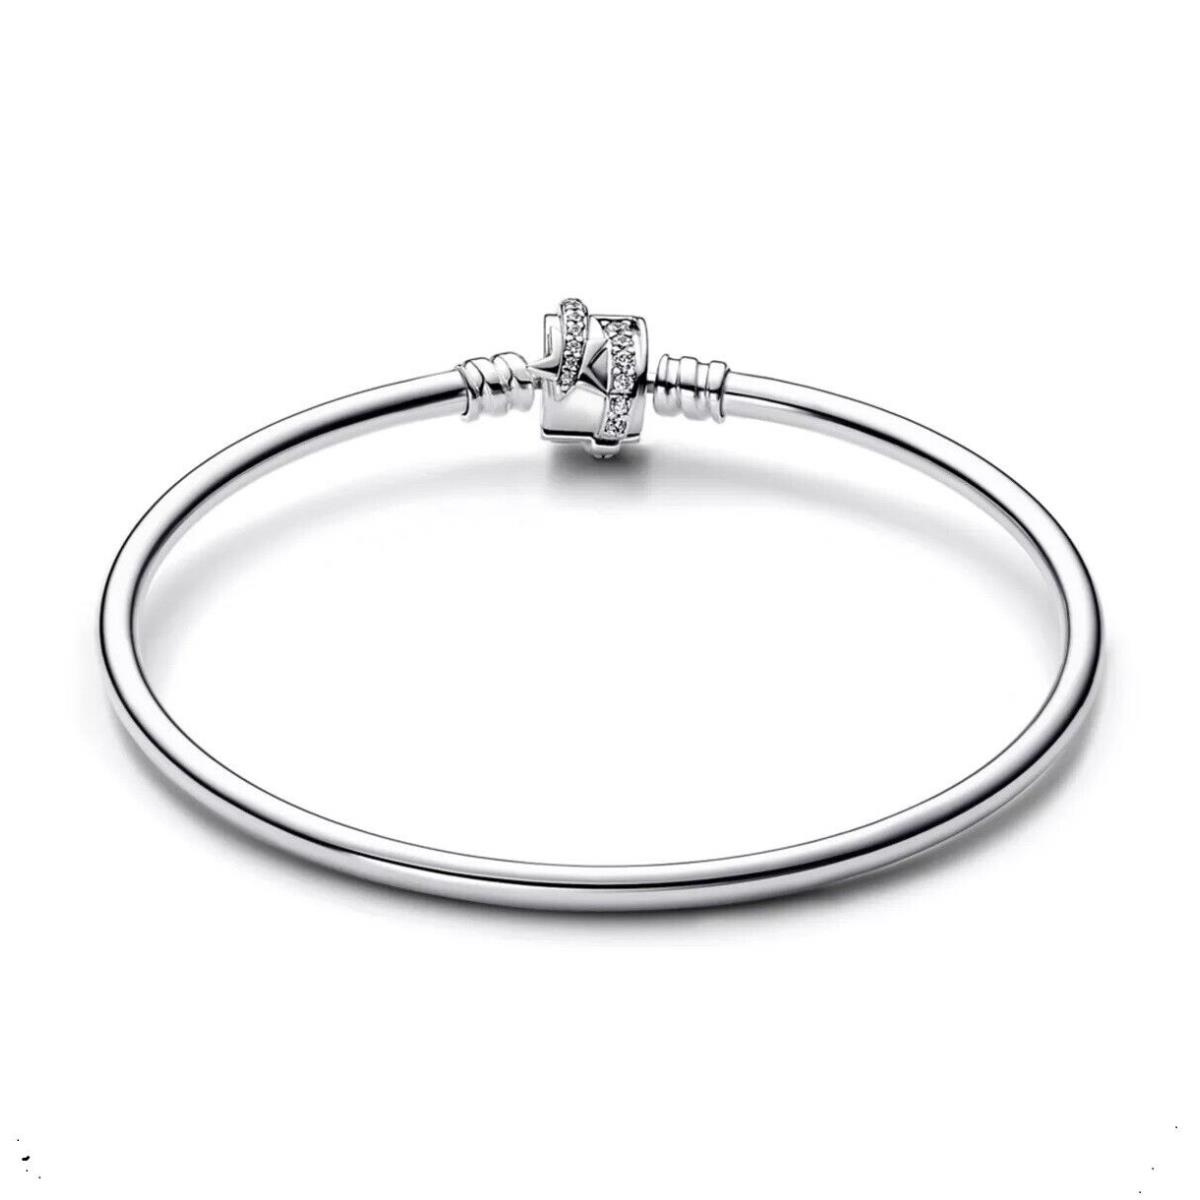 Pandora Moments CZ 925 Silver Sparkling Shooting Star Clasp 592733 C01 8.25 Inch